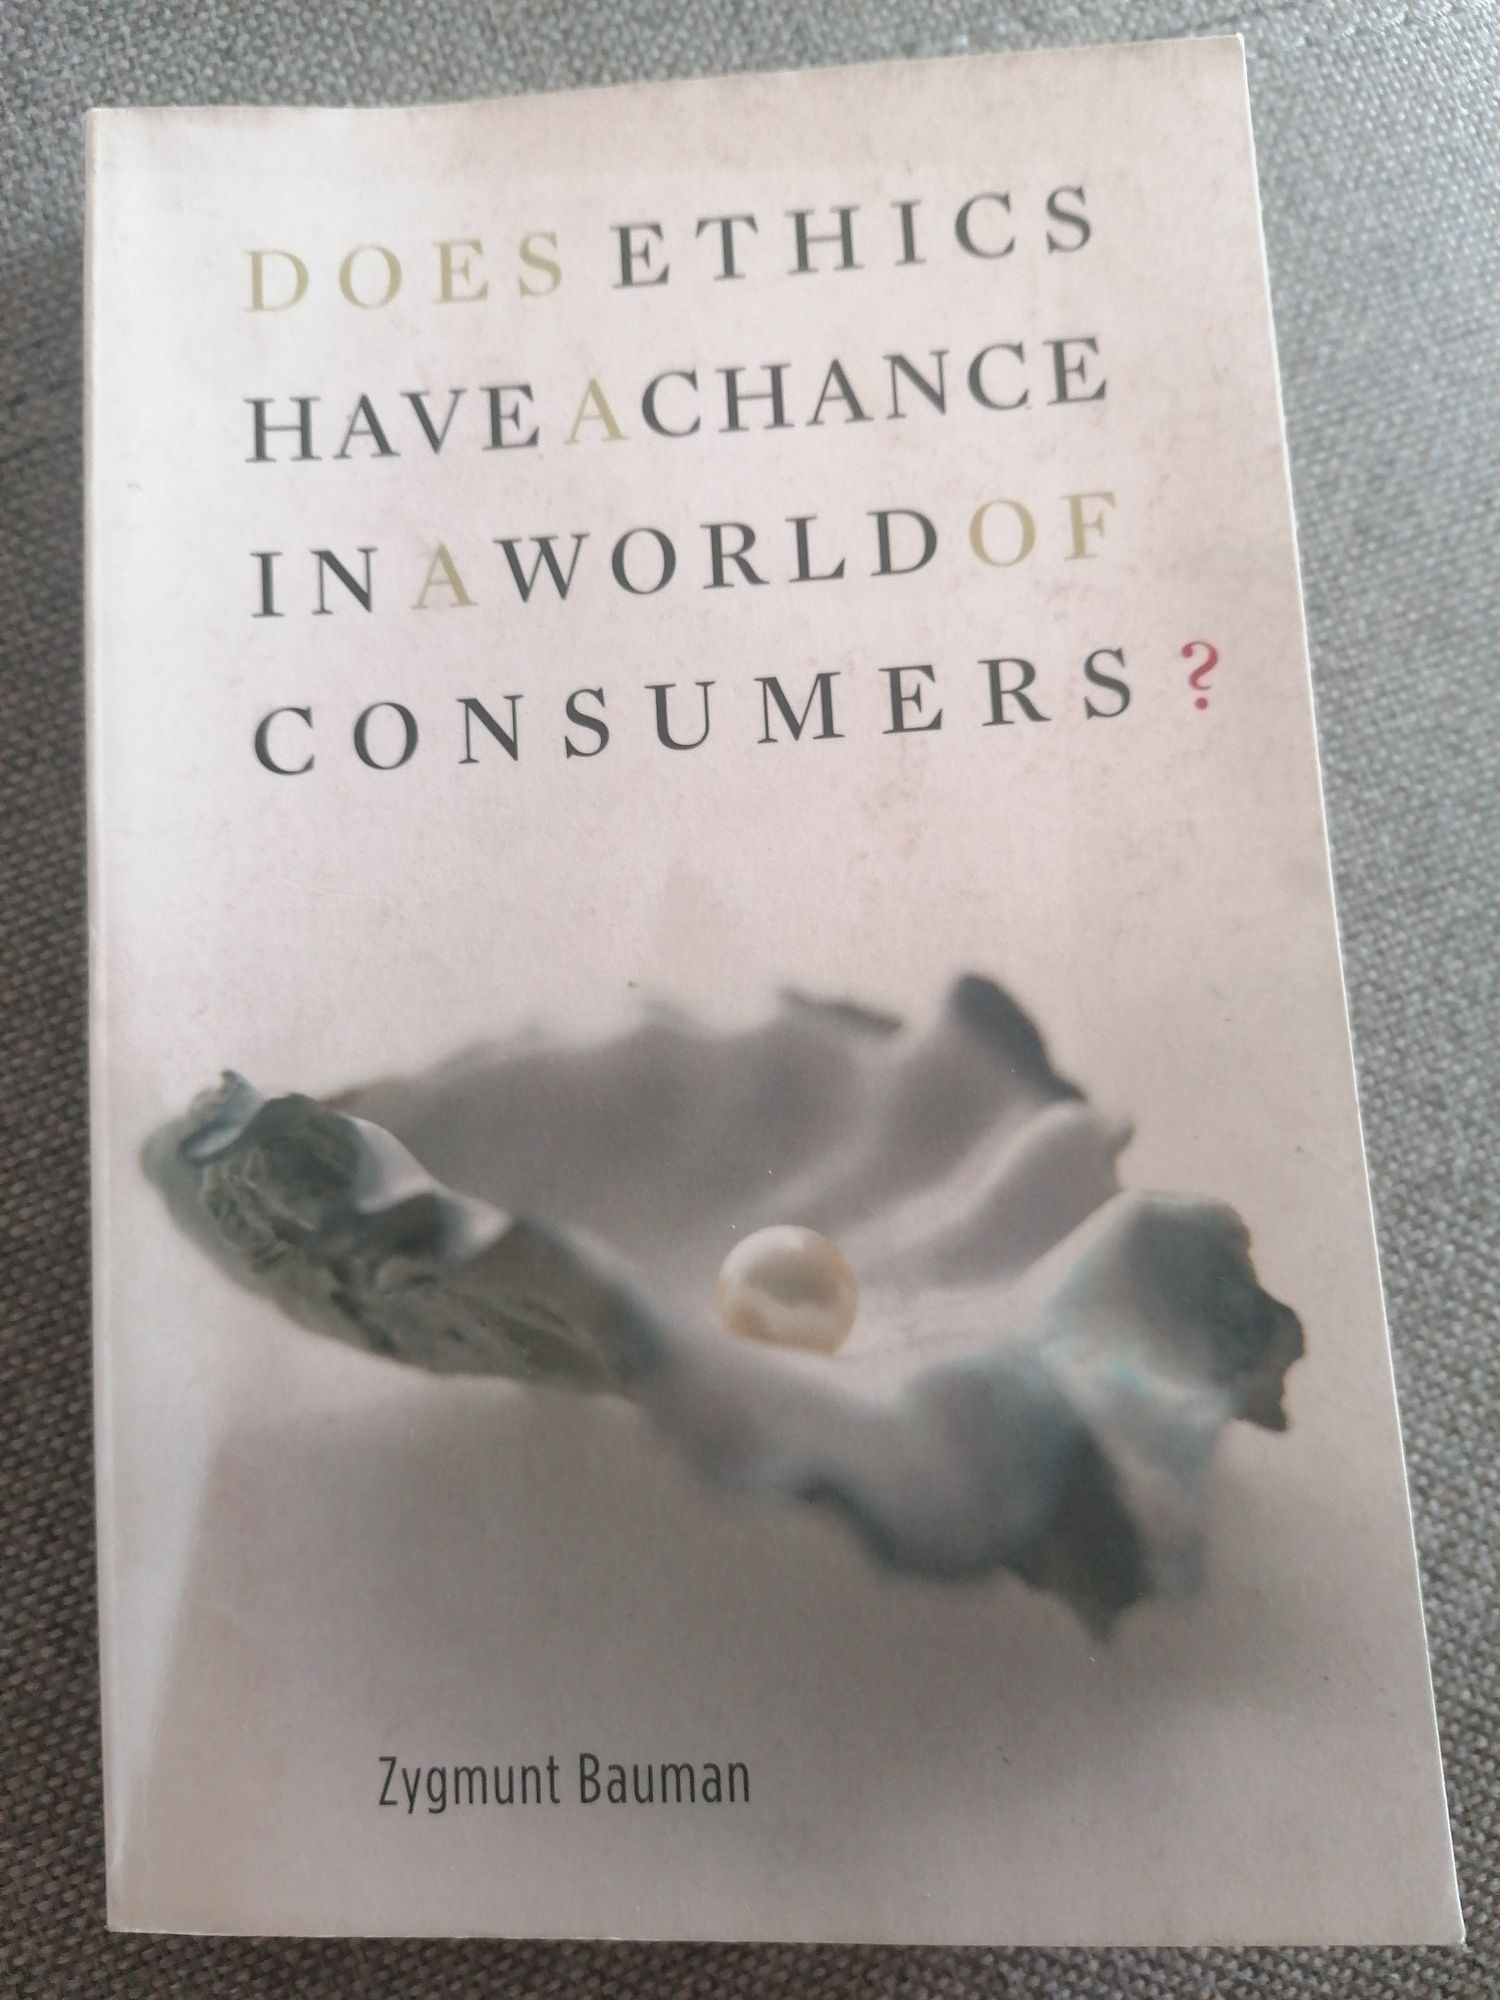 Does ethics have a chance in a World of consumers? Zygmunt Bauman